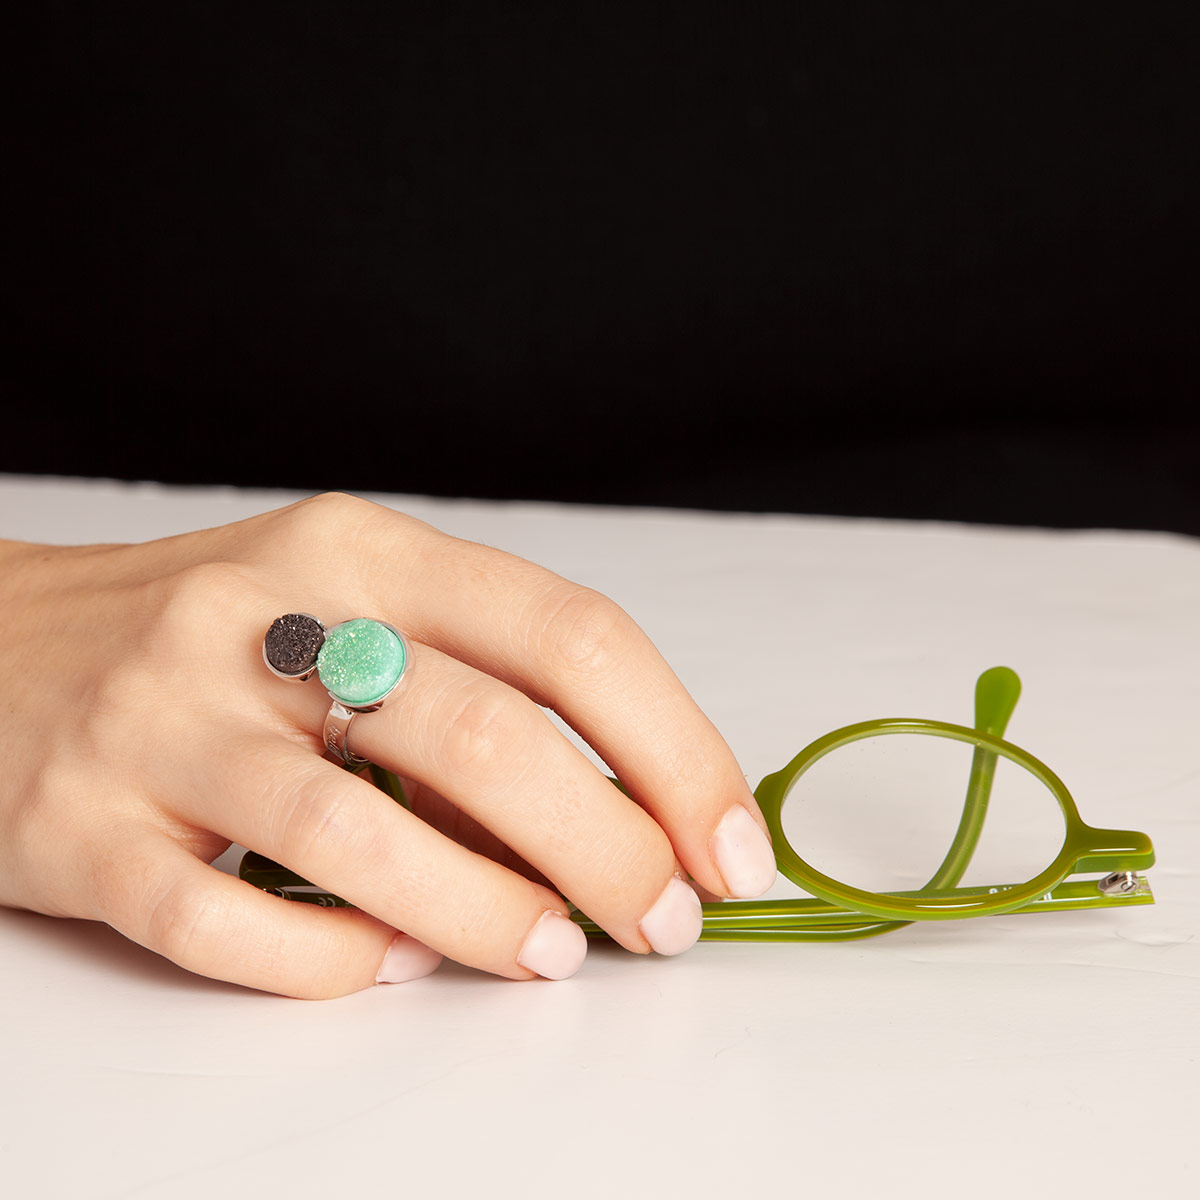 Yin handmade sterling silver ring, green and black agate druzy on hand designed by Belen Bajo